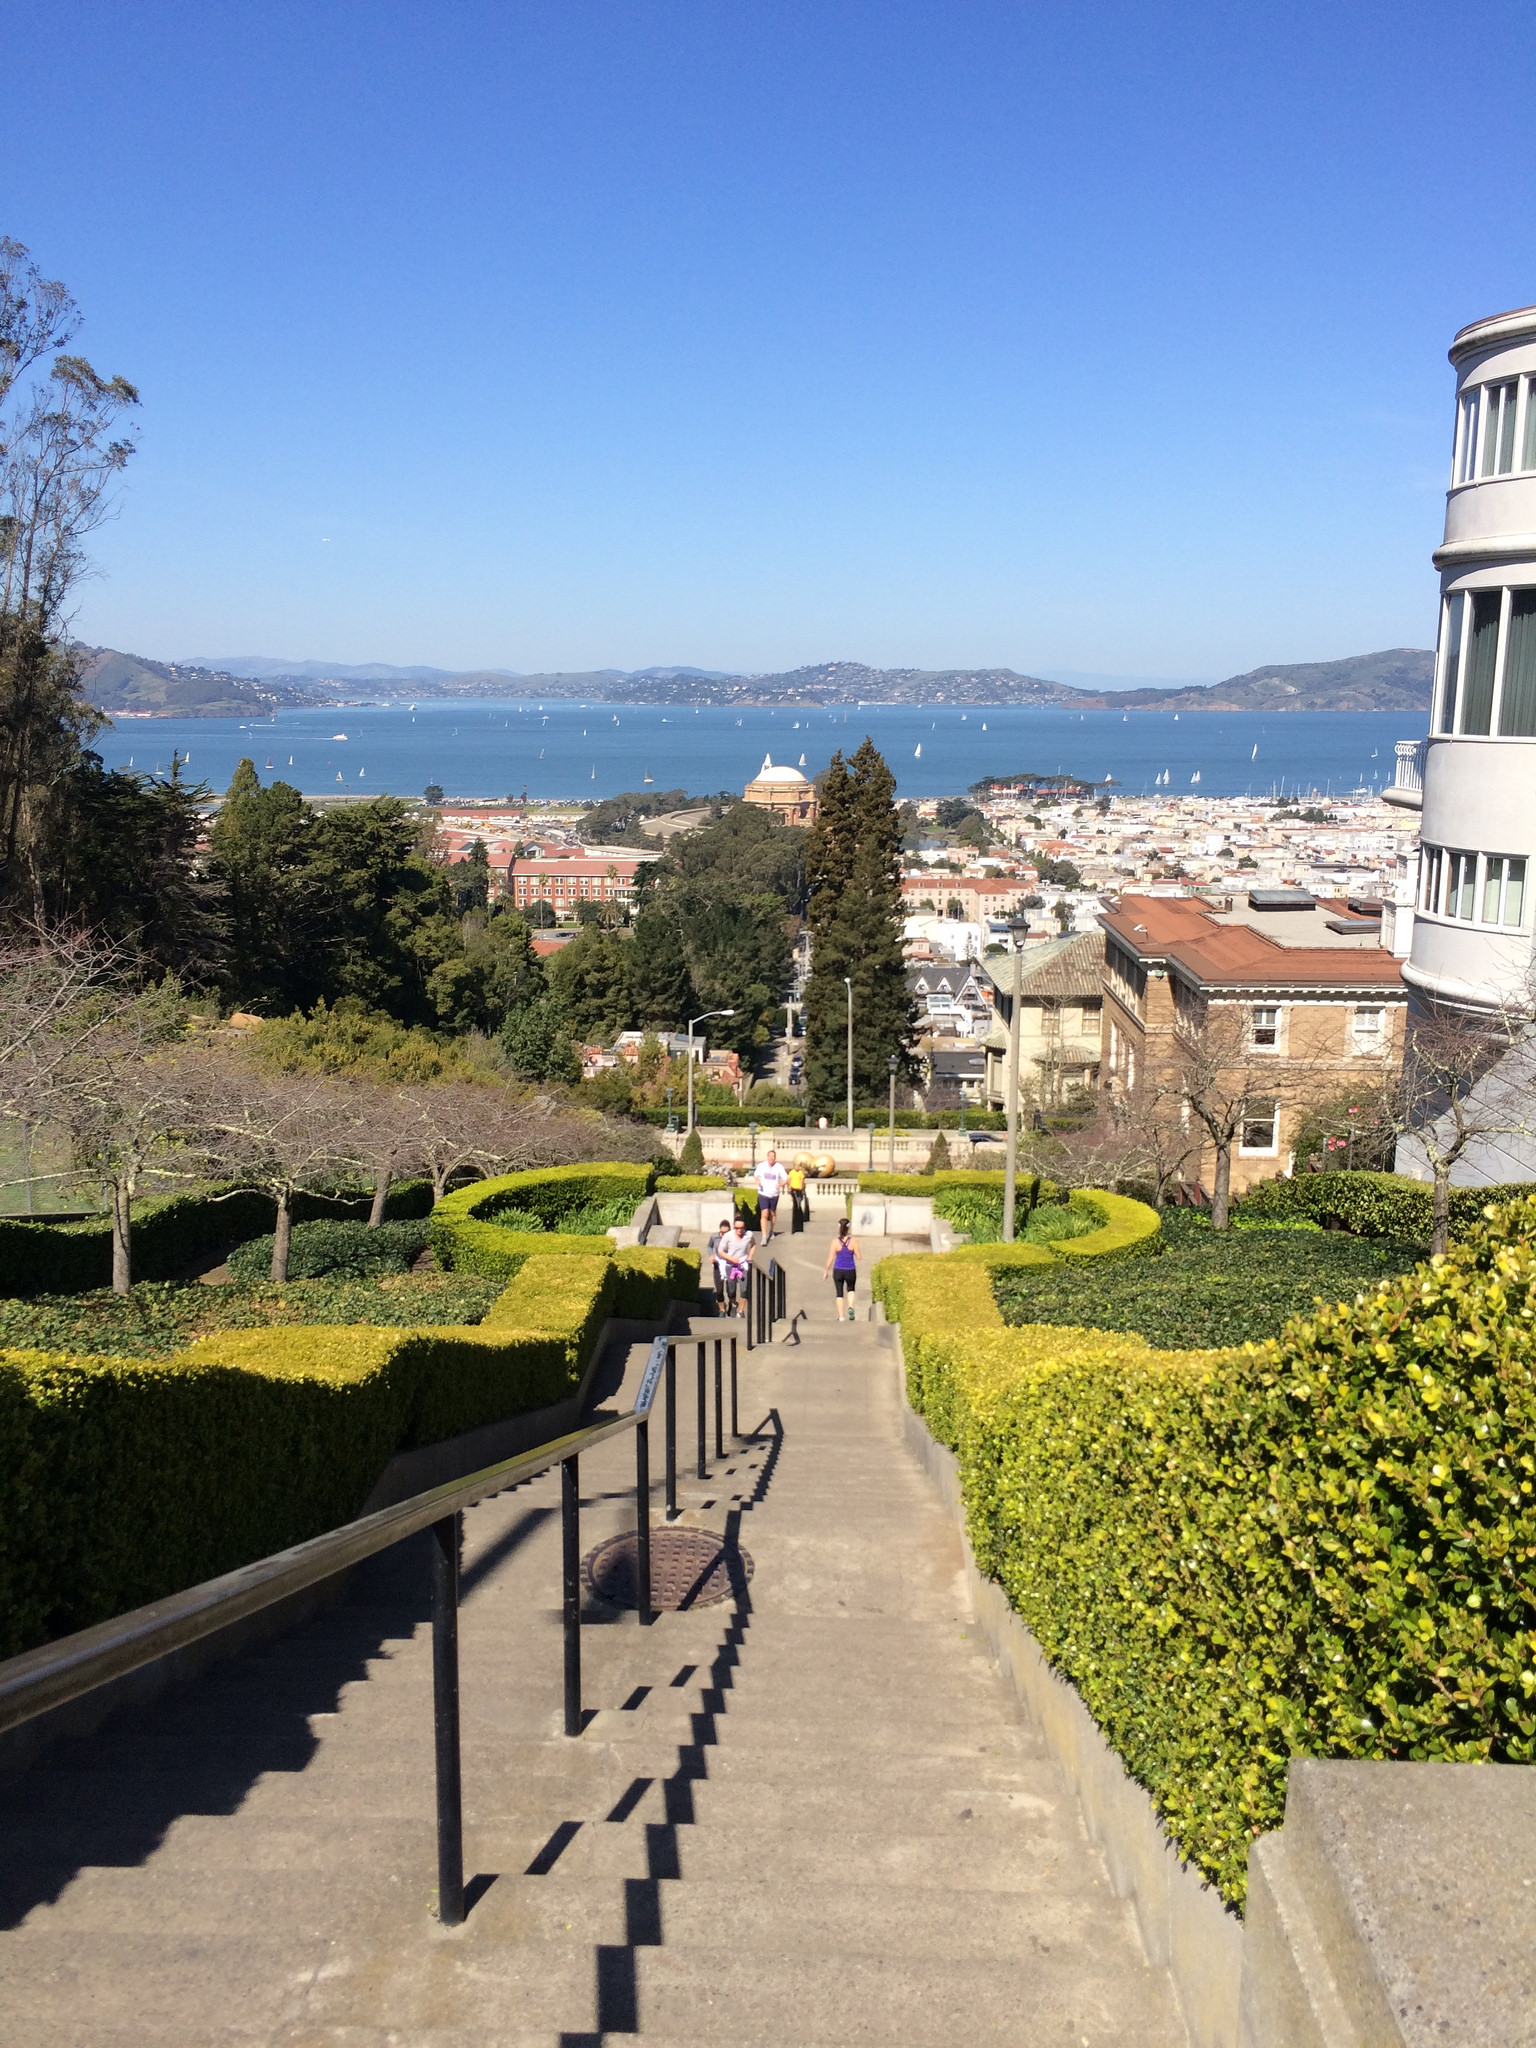 Runners climb a long set of steep concrete steps surrounded by lush gardens and looking out over San Francisco Bay with a bright blue sky above.